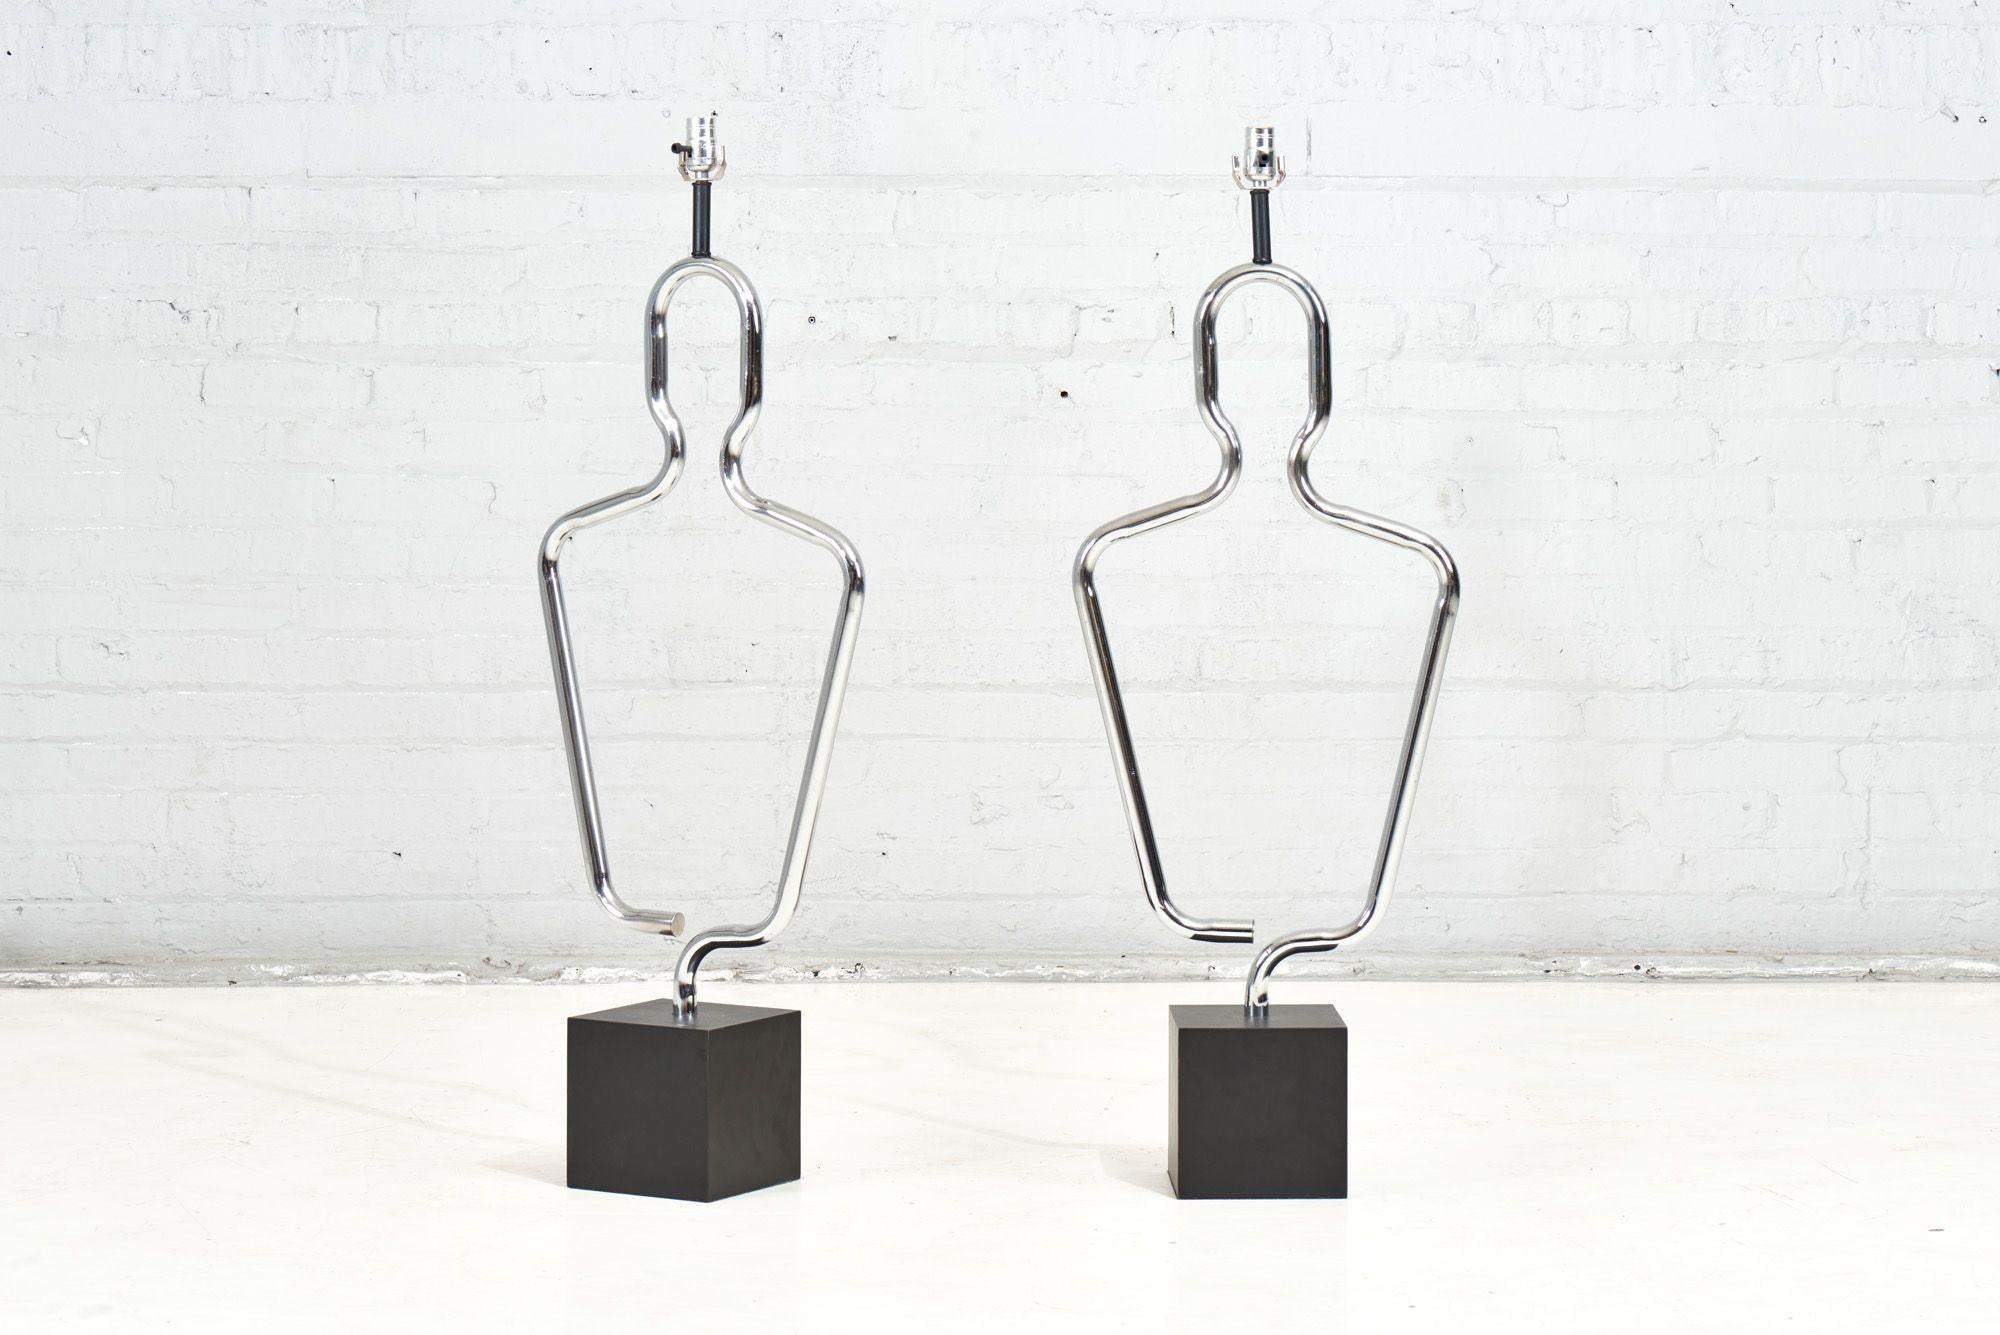 Pair Sculptural Human Figure Chrome Table Lamps, 1970, Original
FREE SHIPPING ANYWHERE IN THE United States.